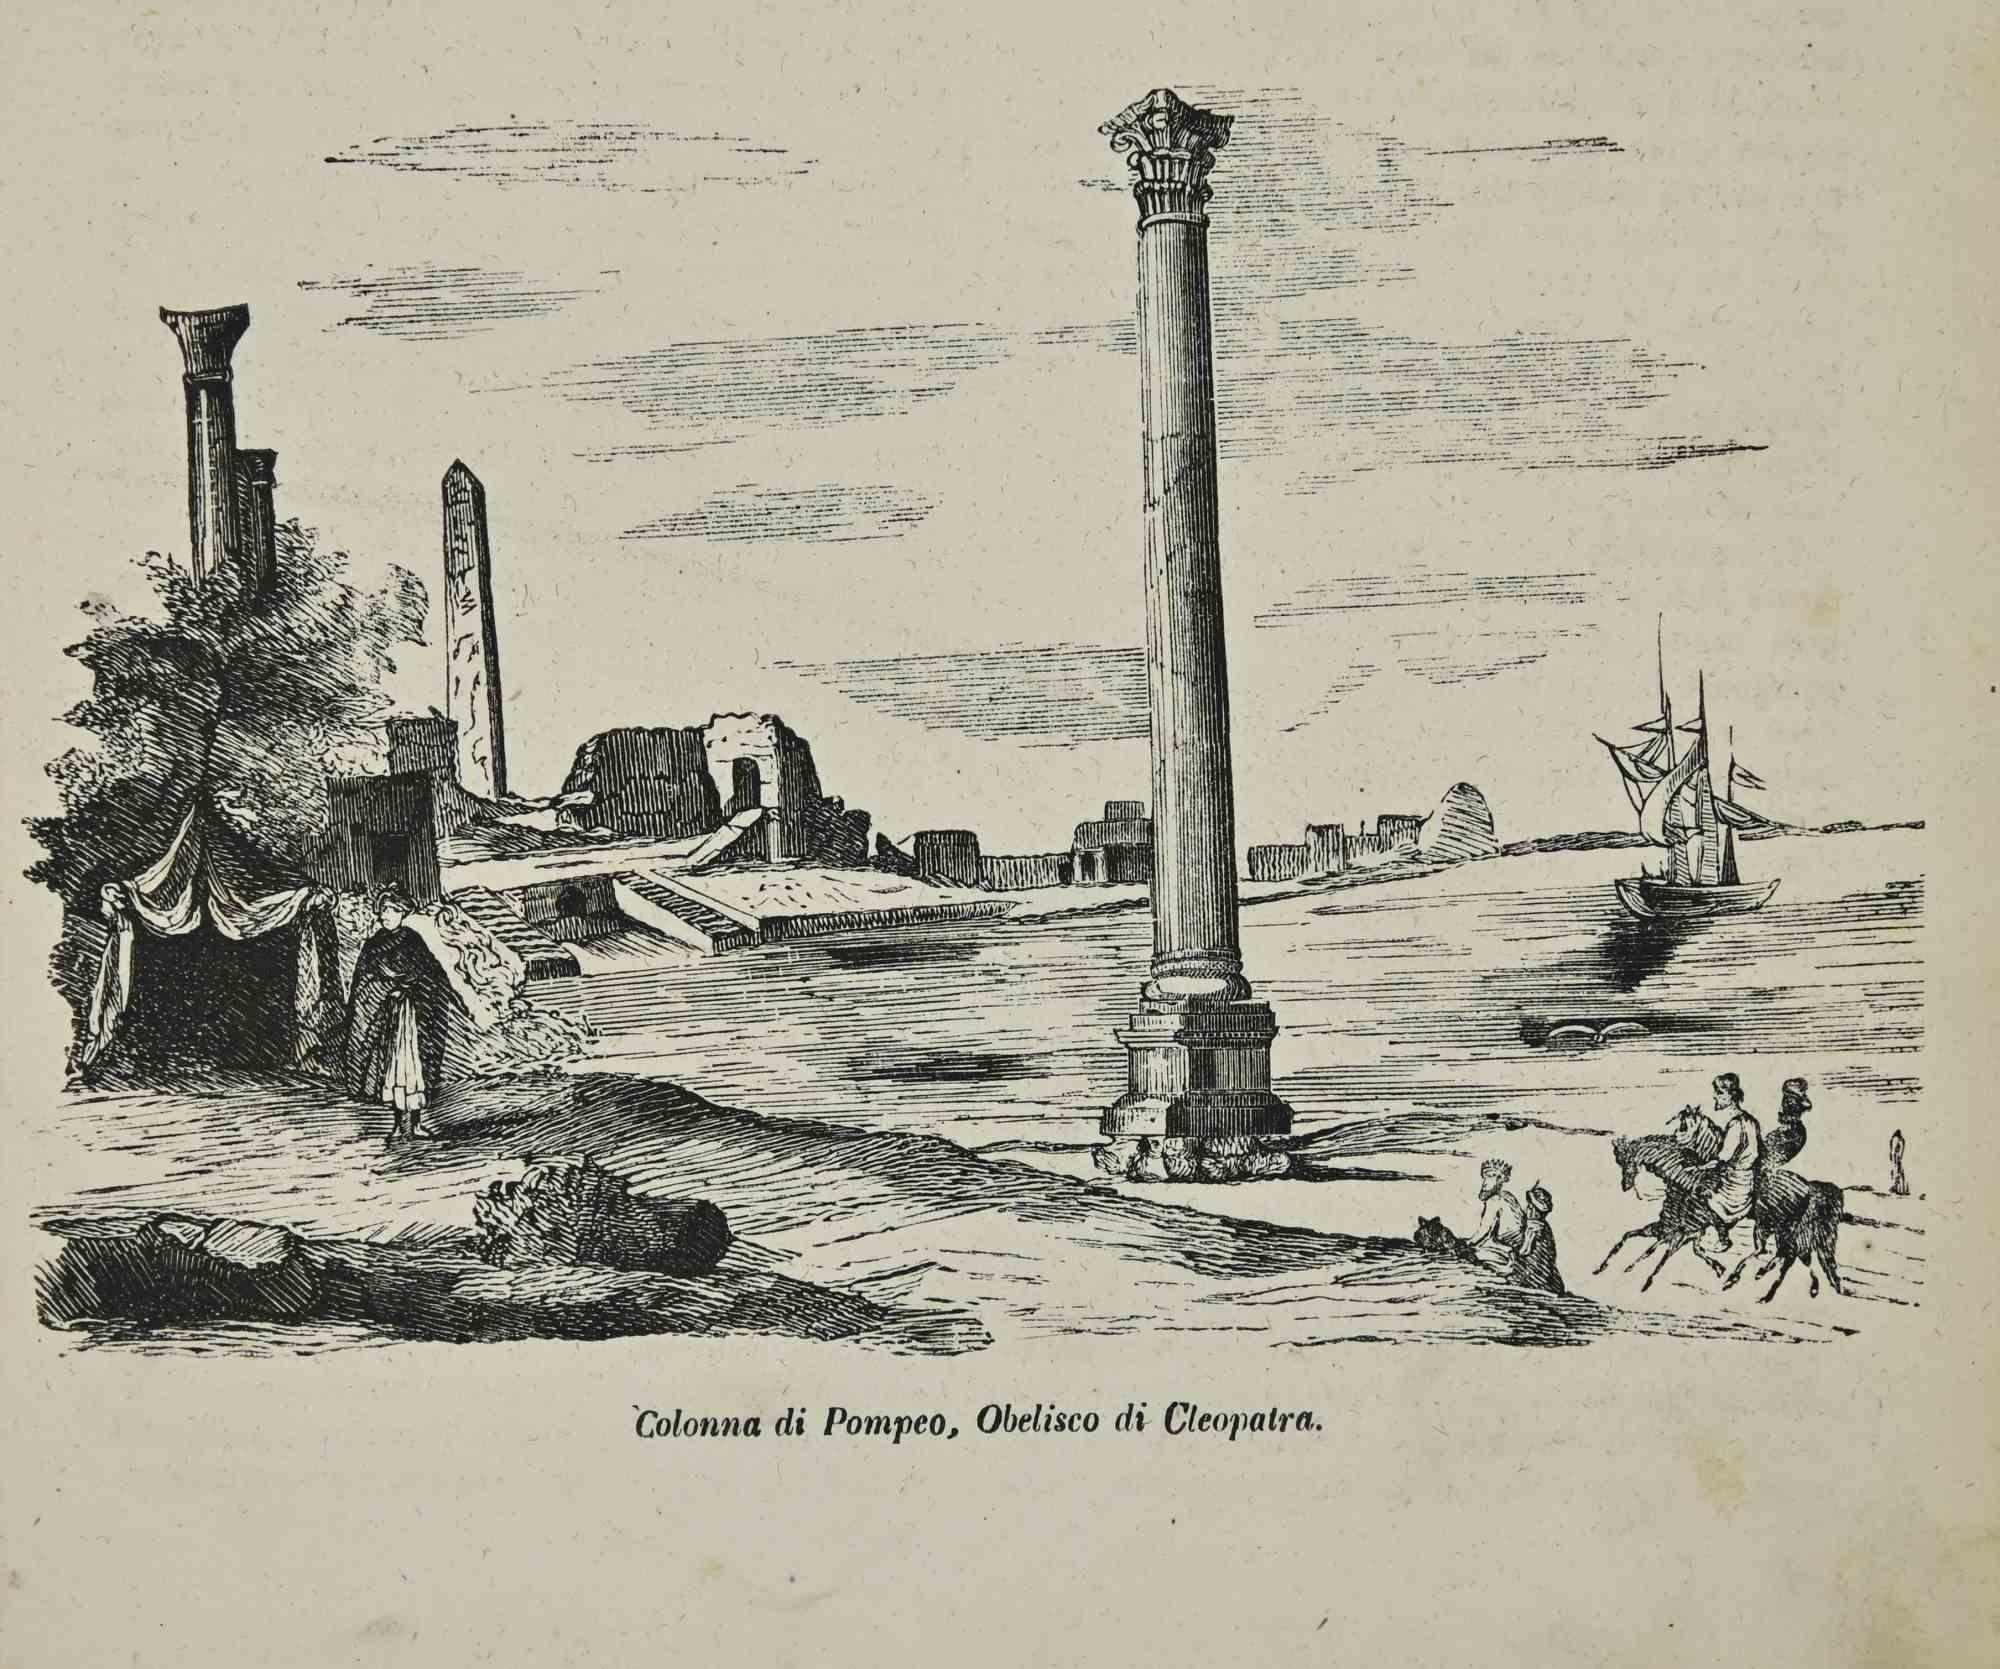 Various Artists Figurative Print - Uses and Customs - Pompey Column, Cleopatra Obelisk - Lithograph - 1862